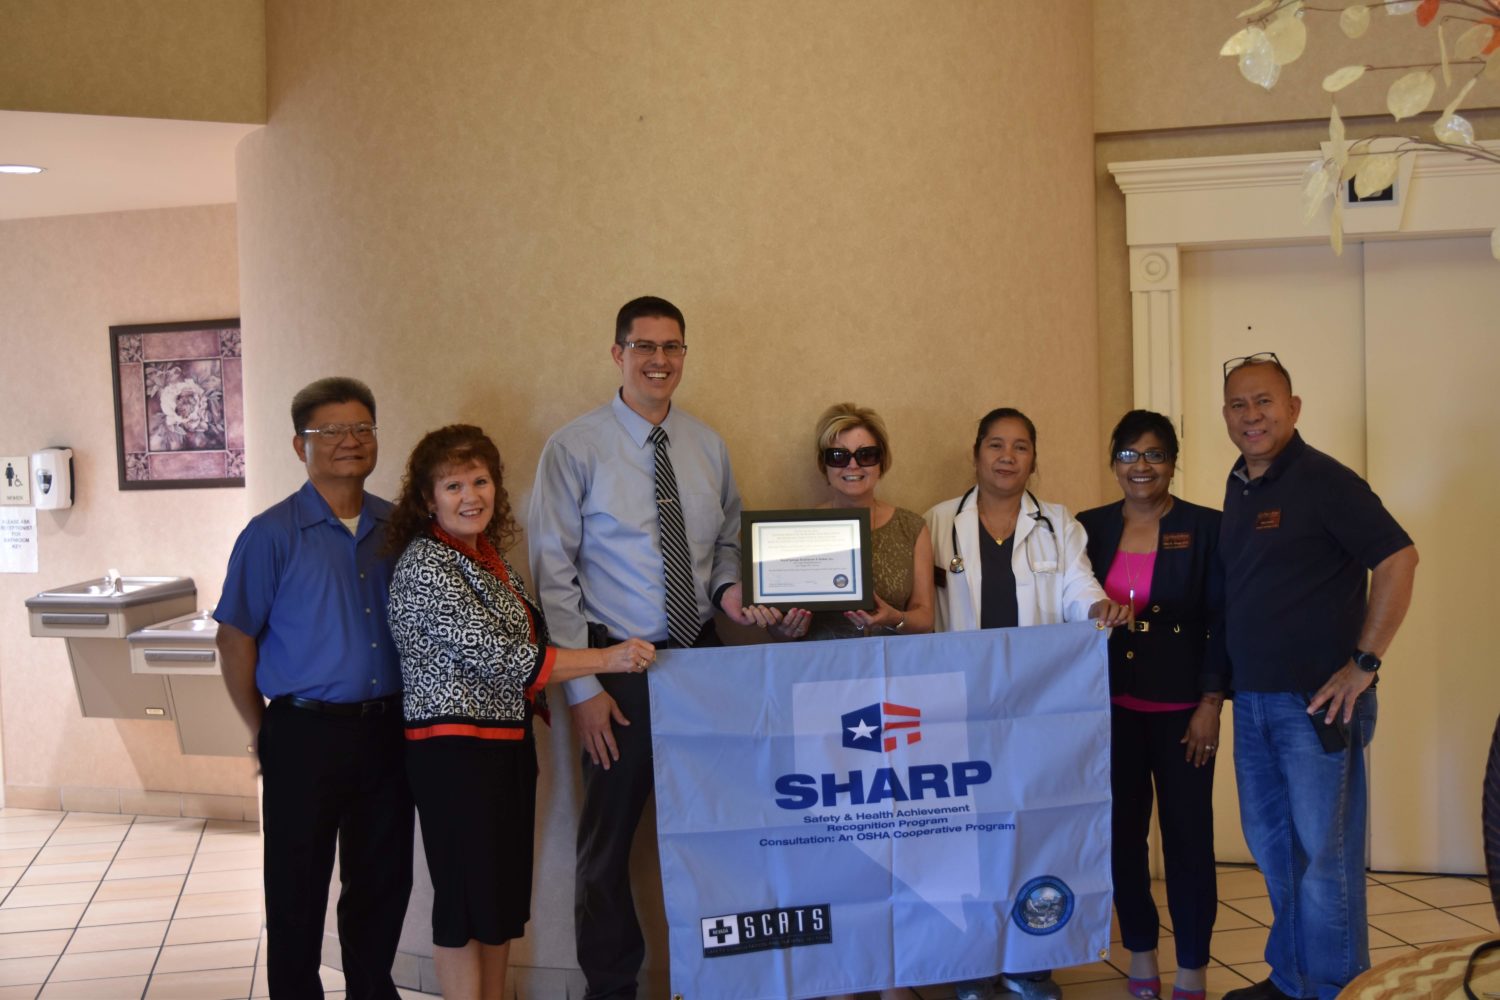 The SCATS of Nevada’s Division of Industrial Relations recognized Royal Springs Healthcare and Rehabilitation located in Las Vegas, Nevada on Aug. 10